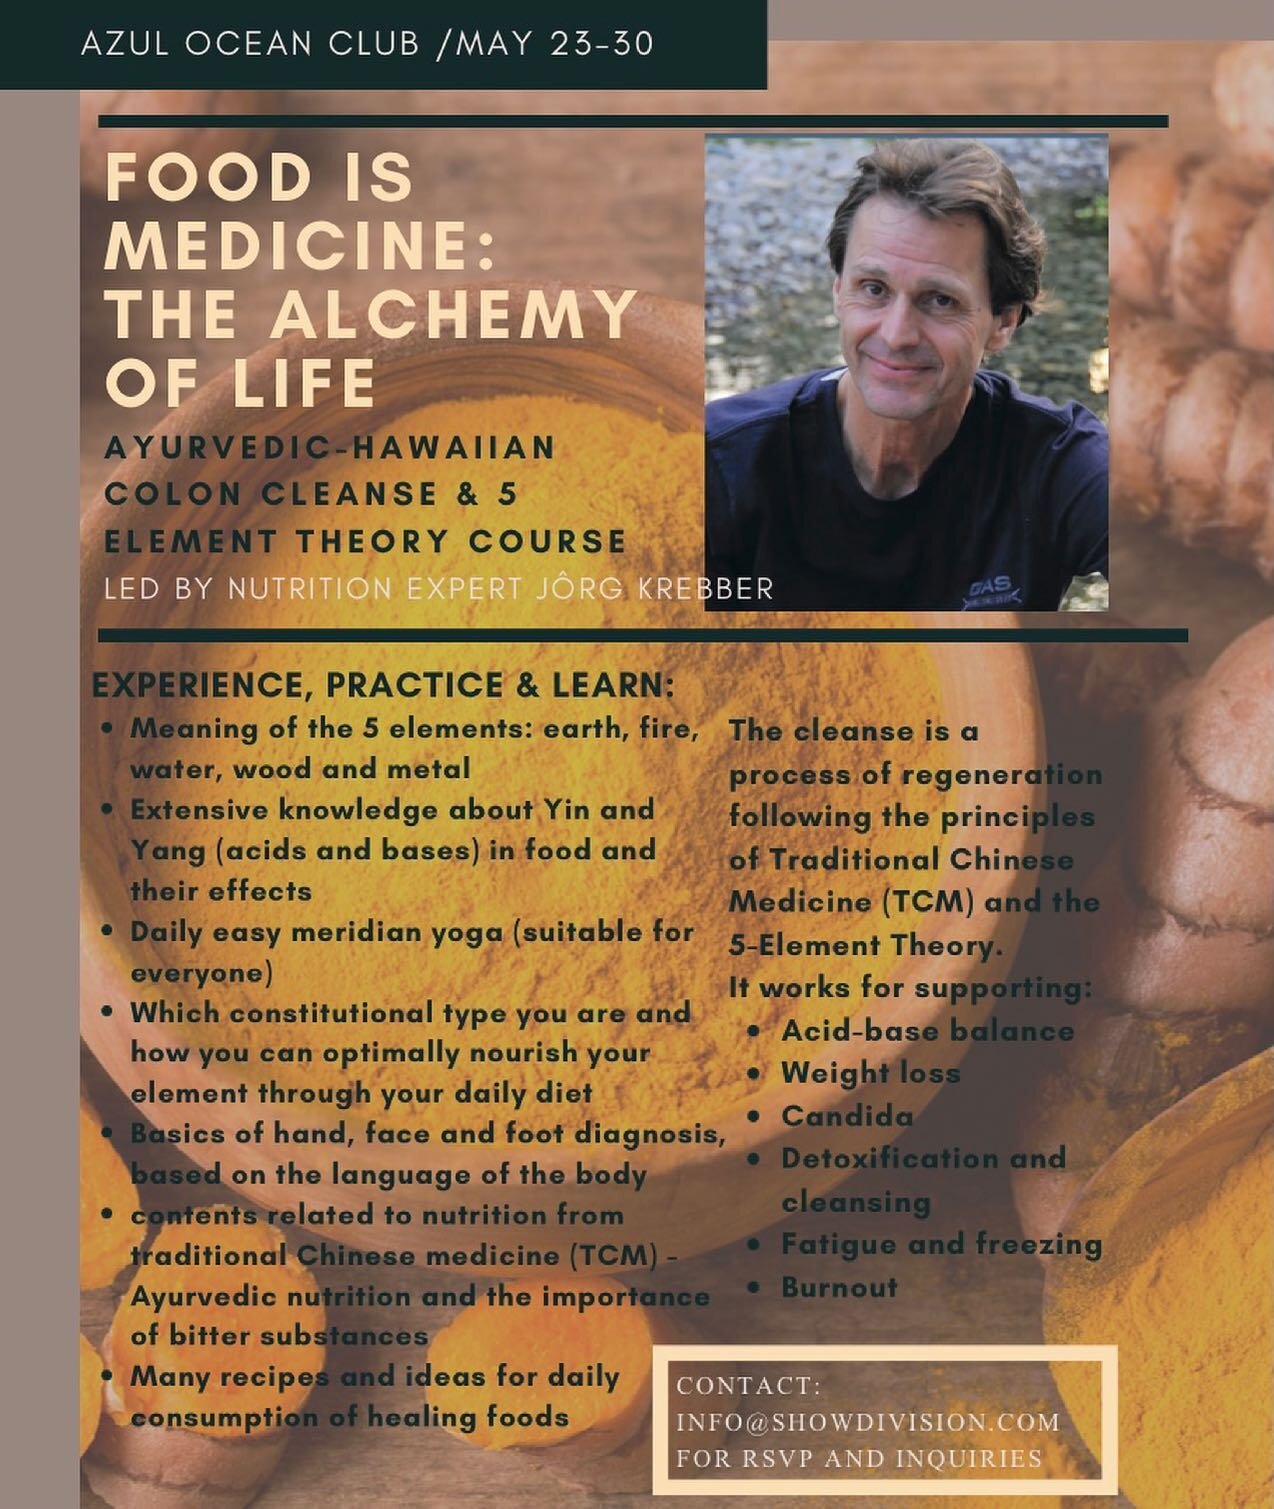 Join us for a whole body/ mind detox and reset!

Food is Medicine: The Alchemy of Life

You will learn the 5-Elements-Teaching in theory and practice from and with the nutrition expert J&ouml;rg Krebber personally.

The Hawaiian-Ayurvedic colon clean